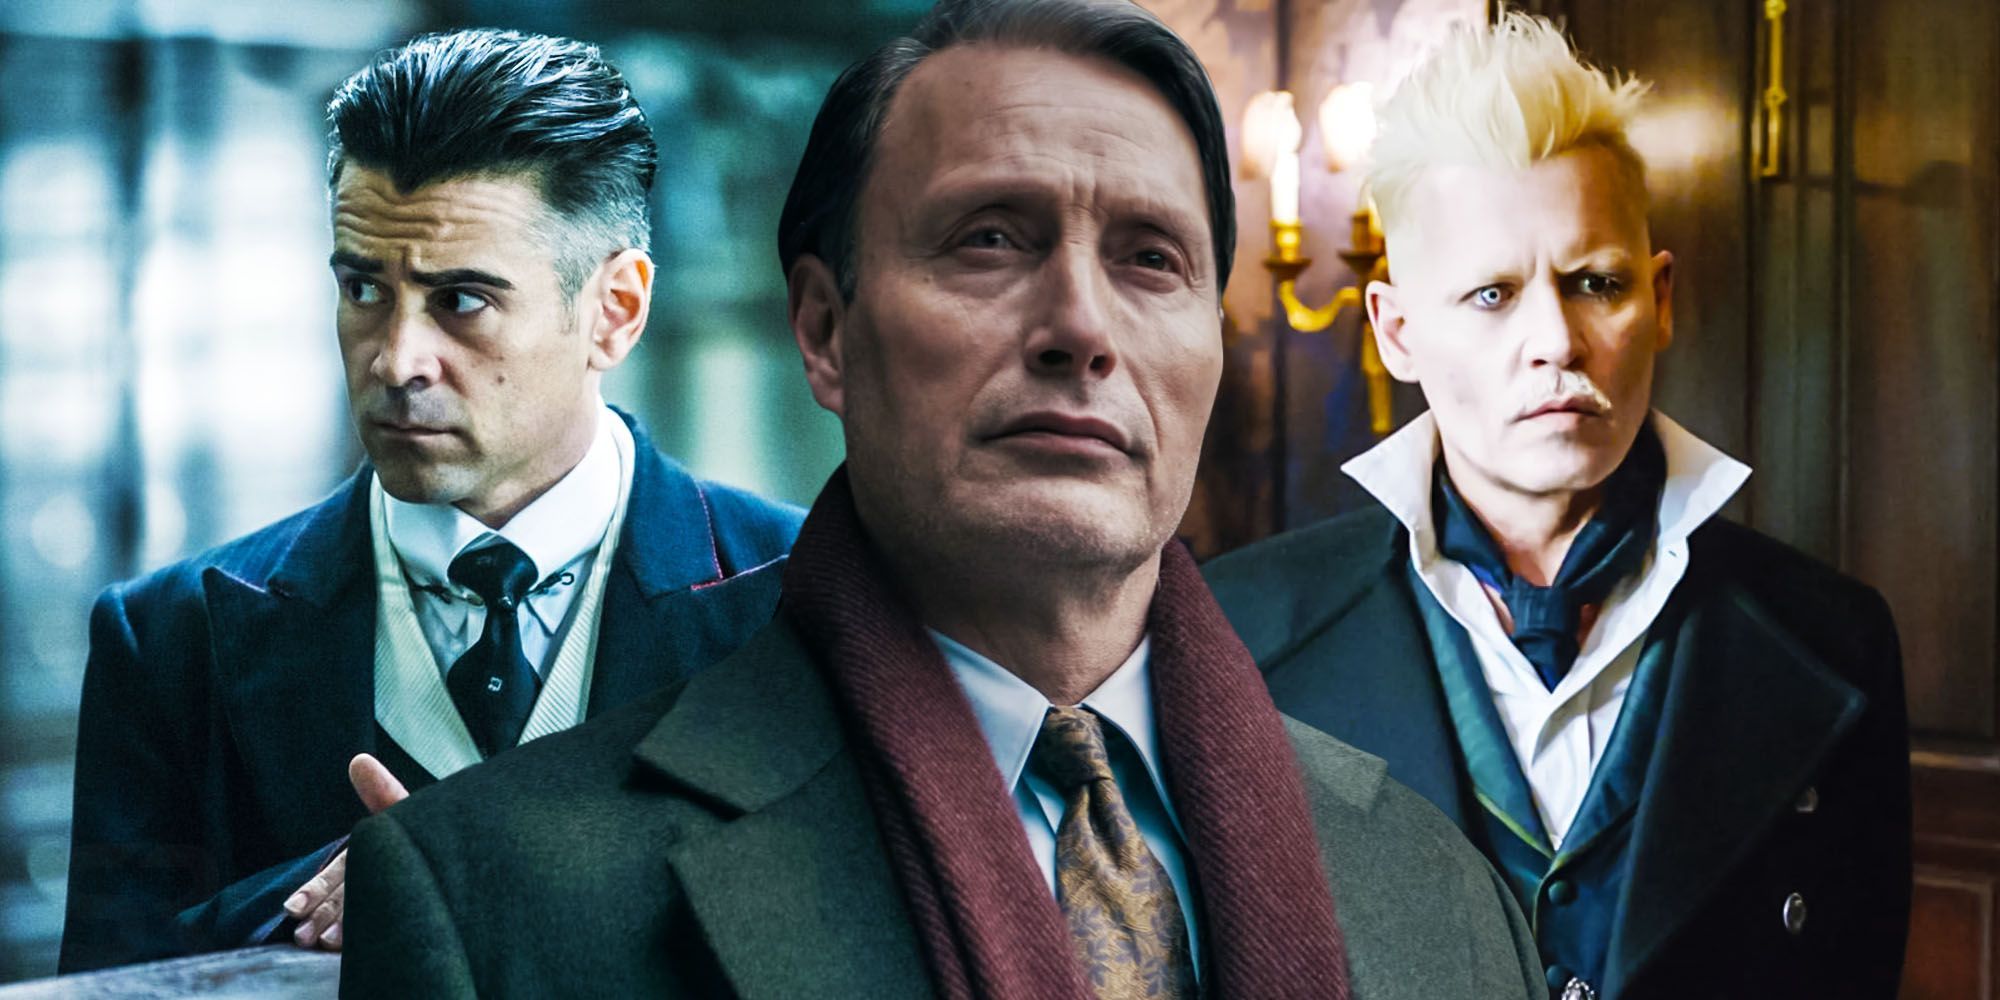 A collage of Colin Farrell, Mads Mikkelsen and Johnny Depp as Grindelwald